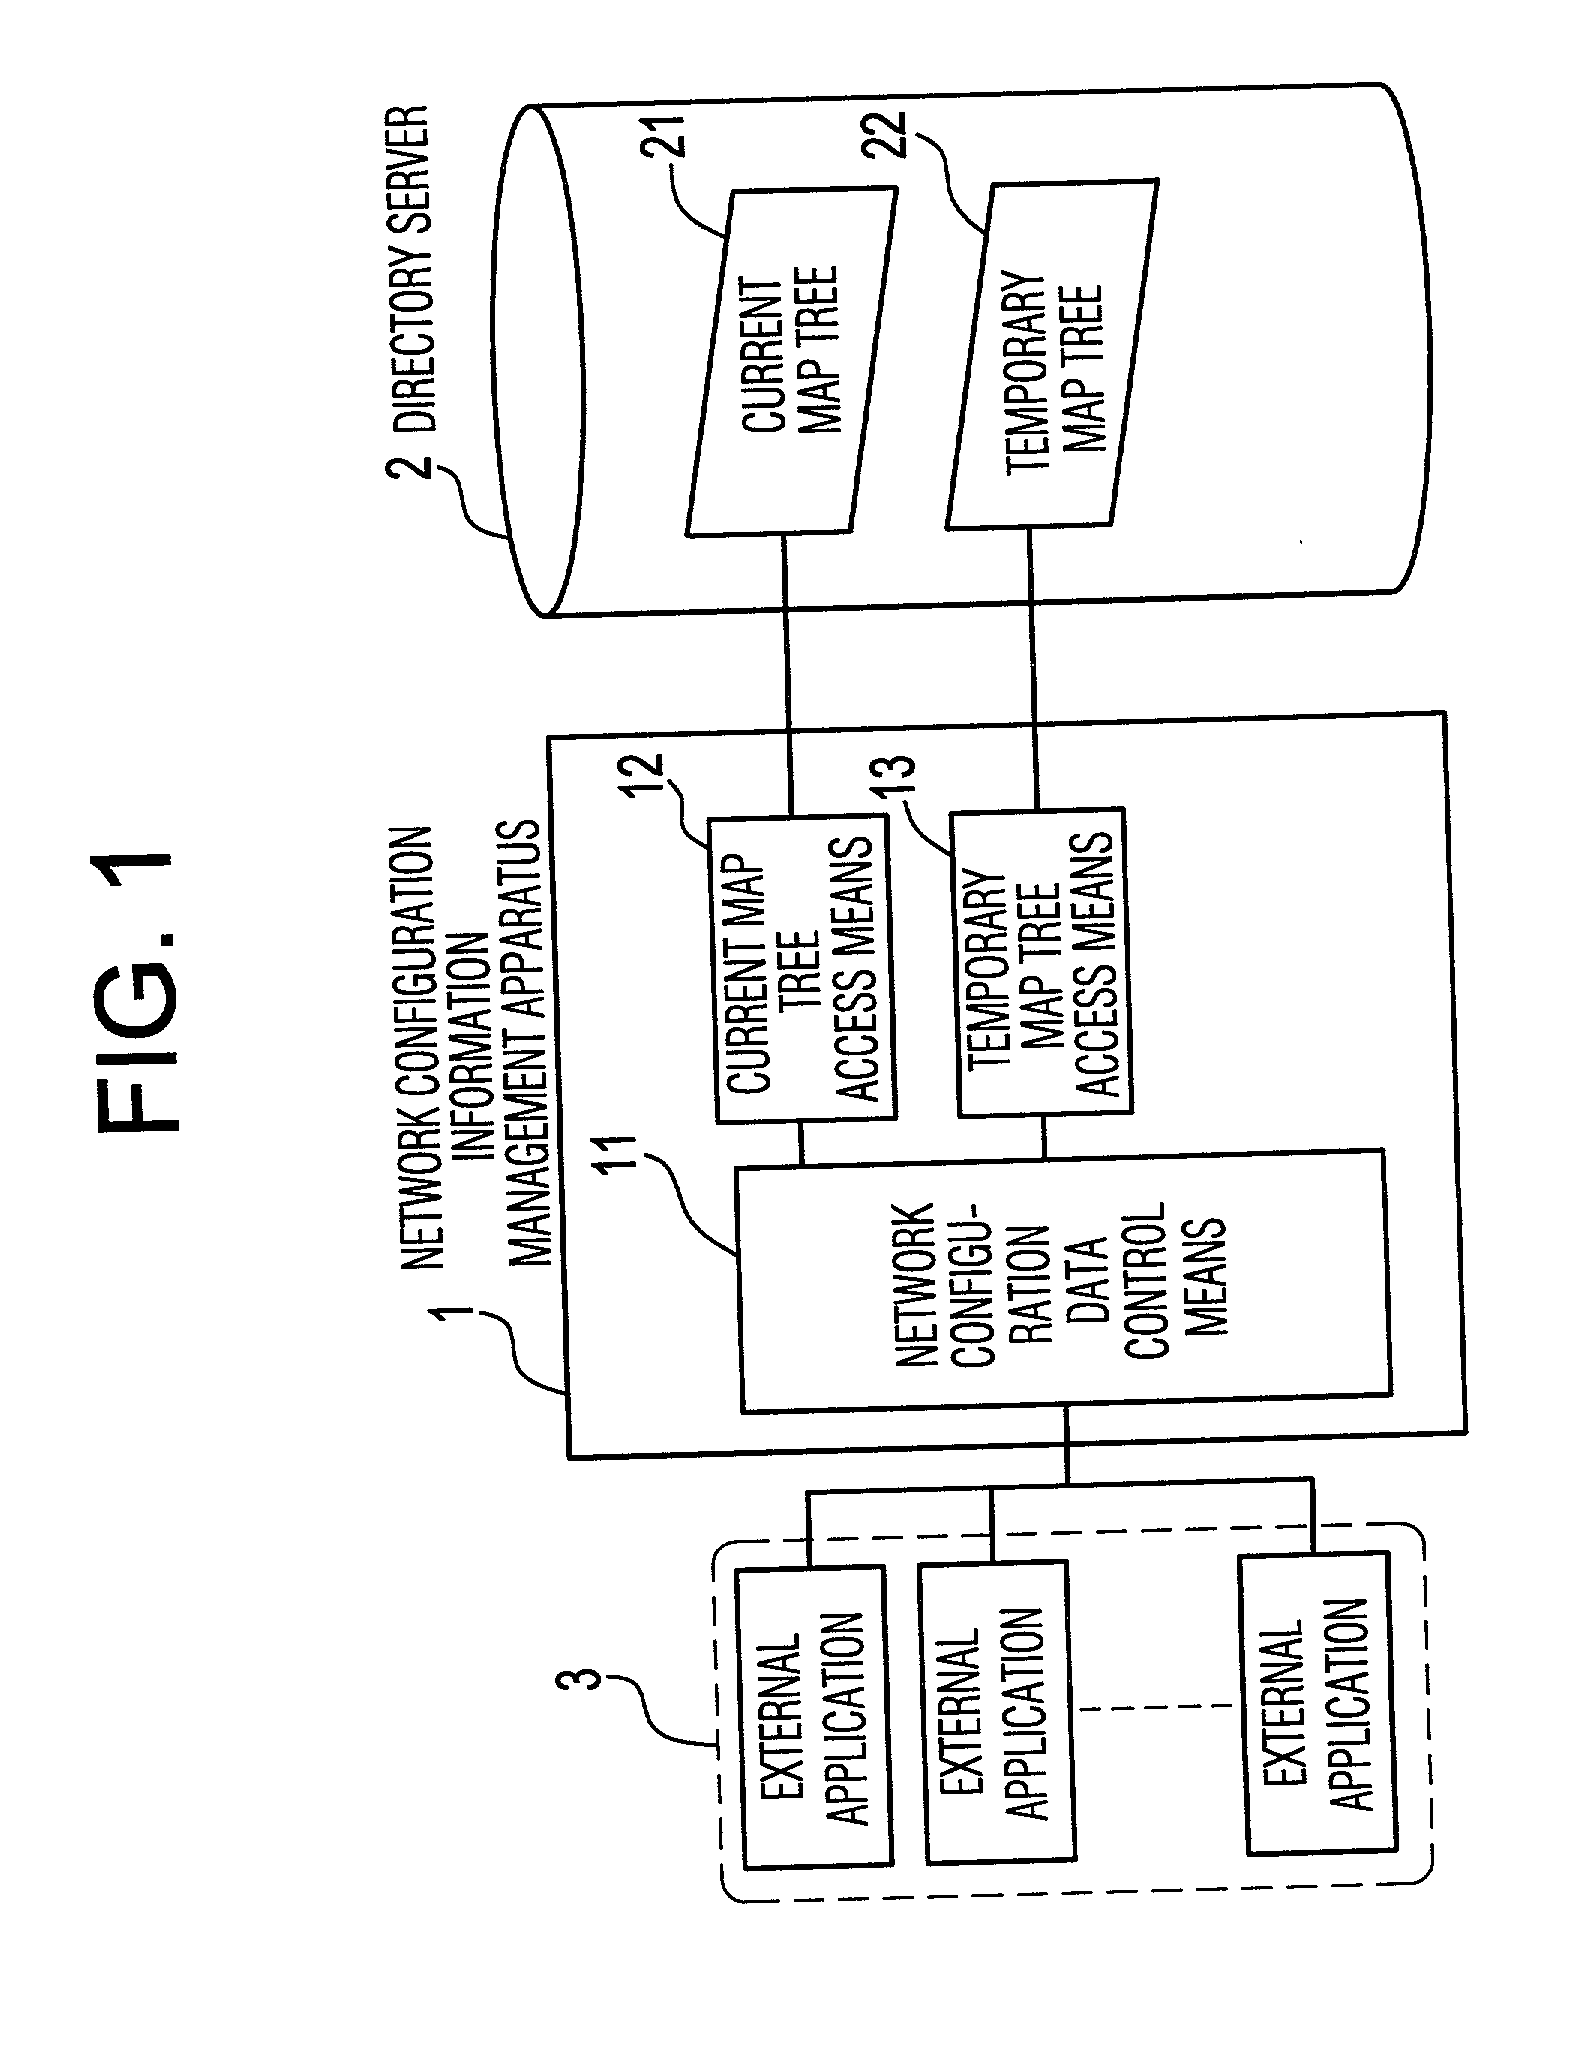 System and method for managing network configuration data, computer program for same